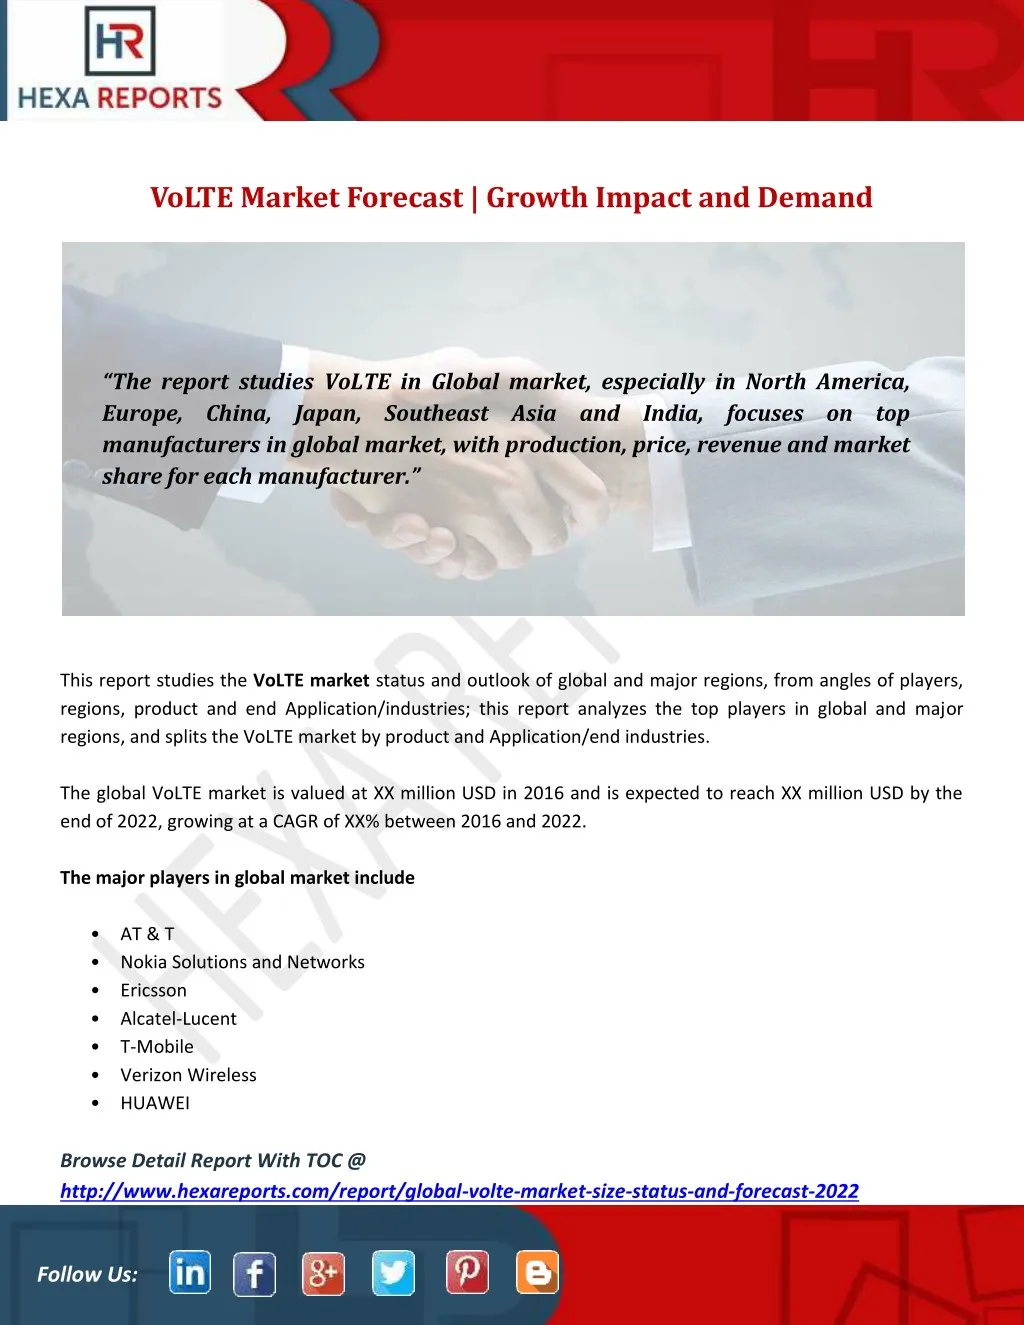 volte market forecast growth impact and demand